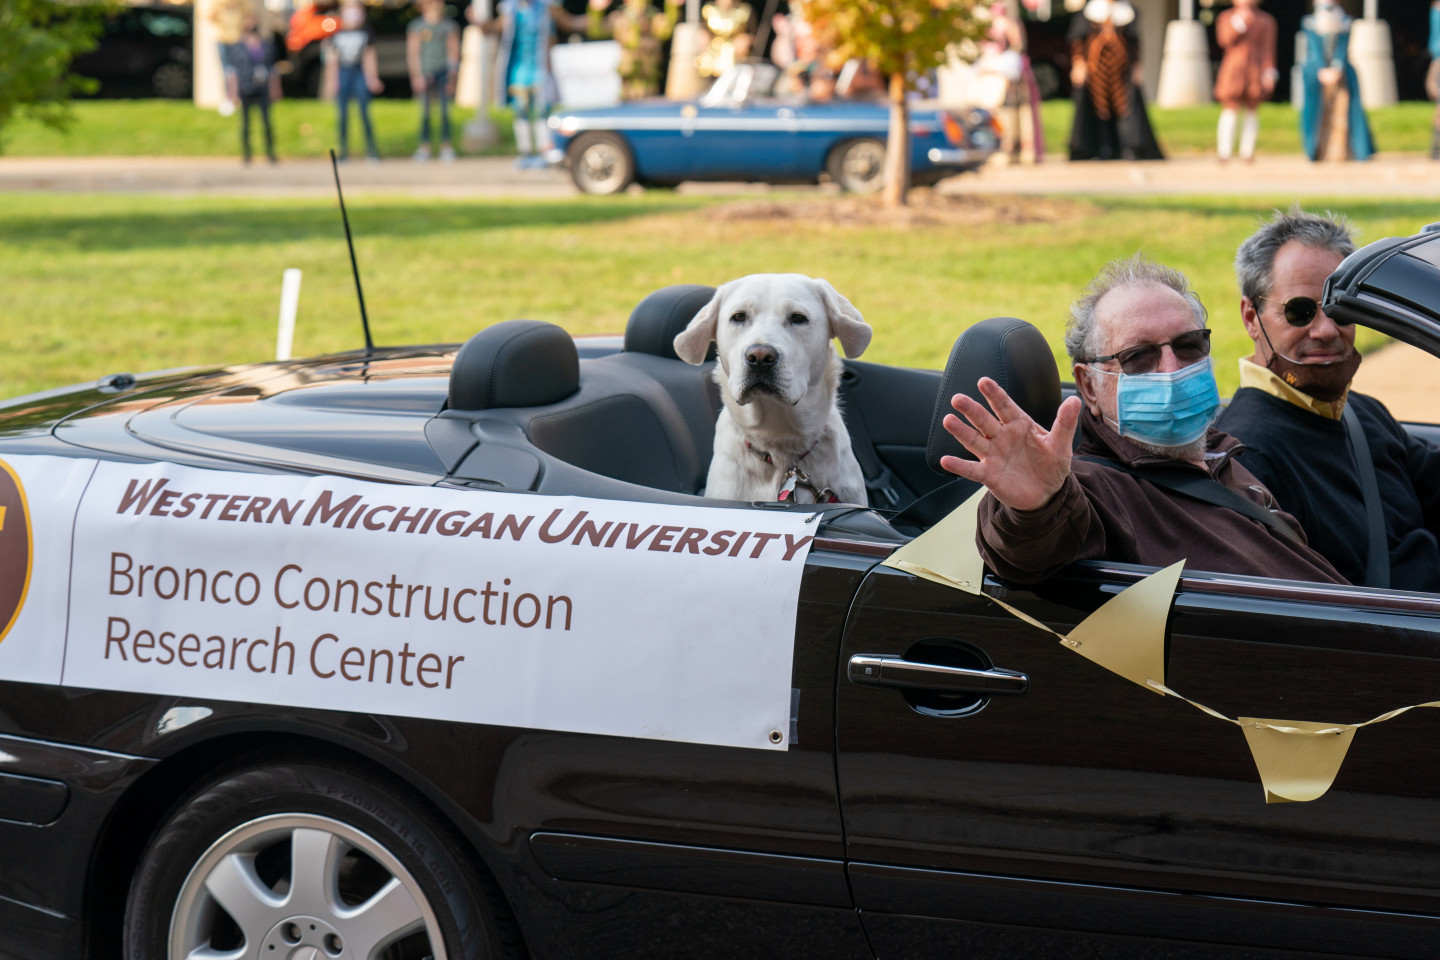 A dog sits in the back of a car with a "Bronco Construction Research Center" sign.